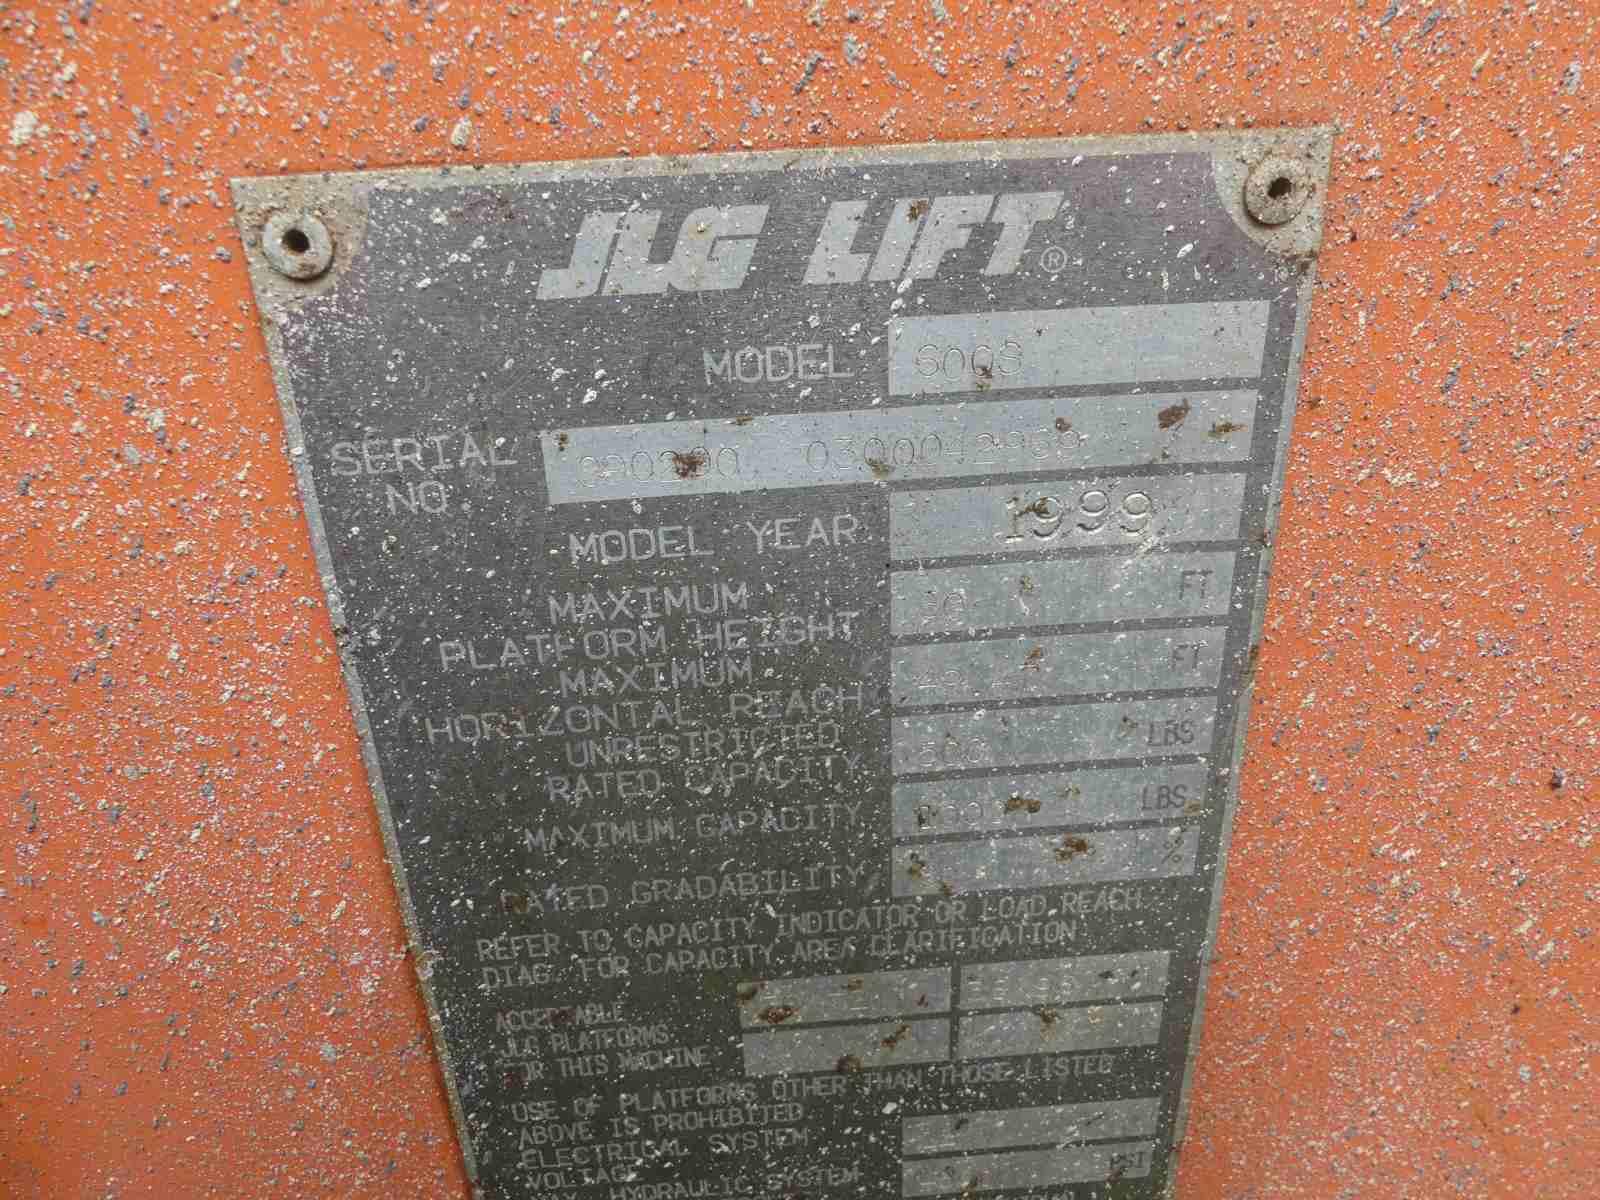 JLG 600S 4WD Boom-type Manlift, s/n 300042969: Gas Eng., Meter Shows 4546 h